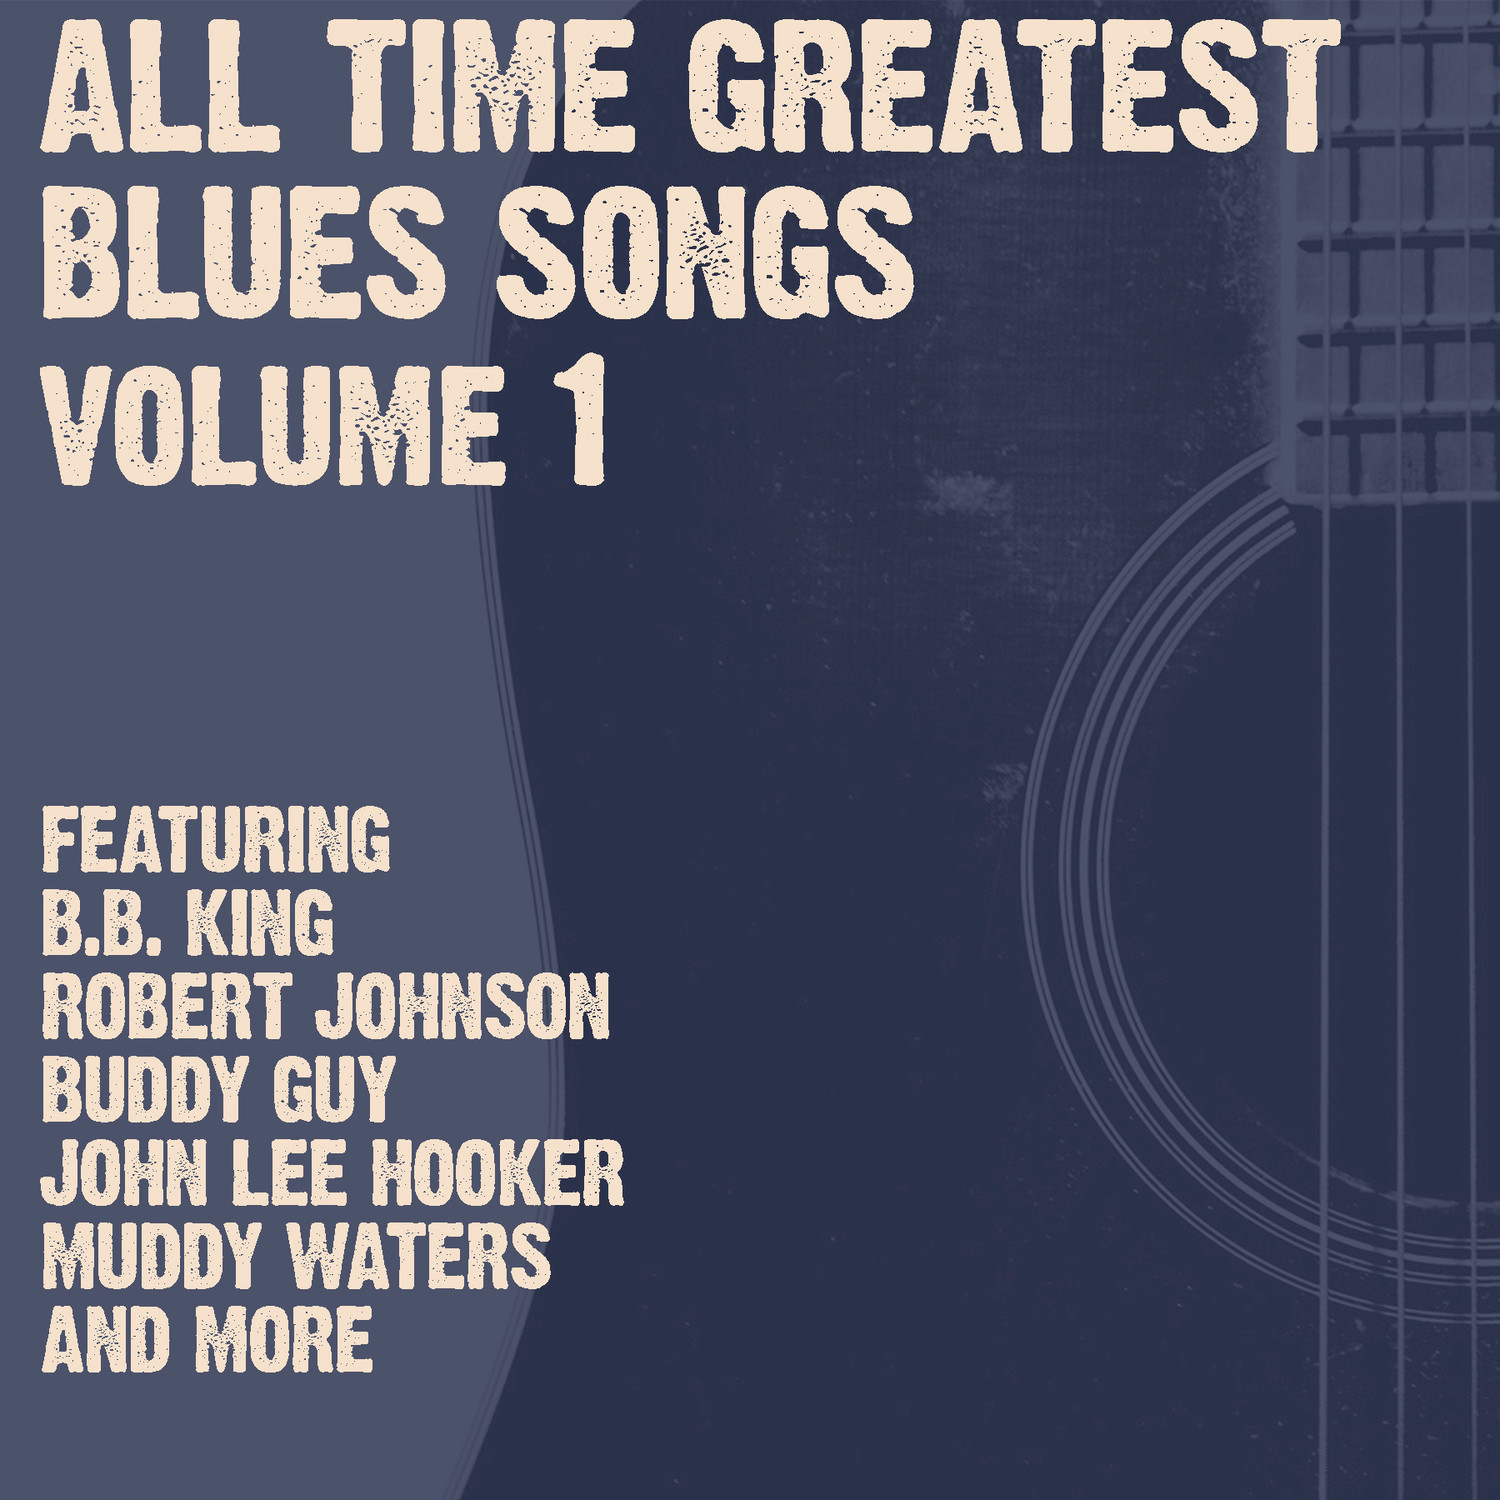 All Time Greatest Blues Songs Volume 1